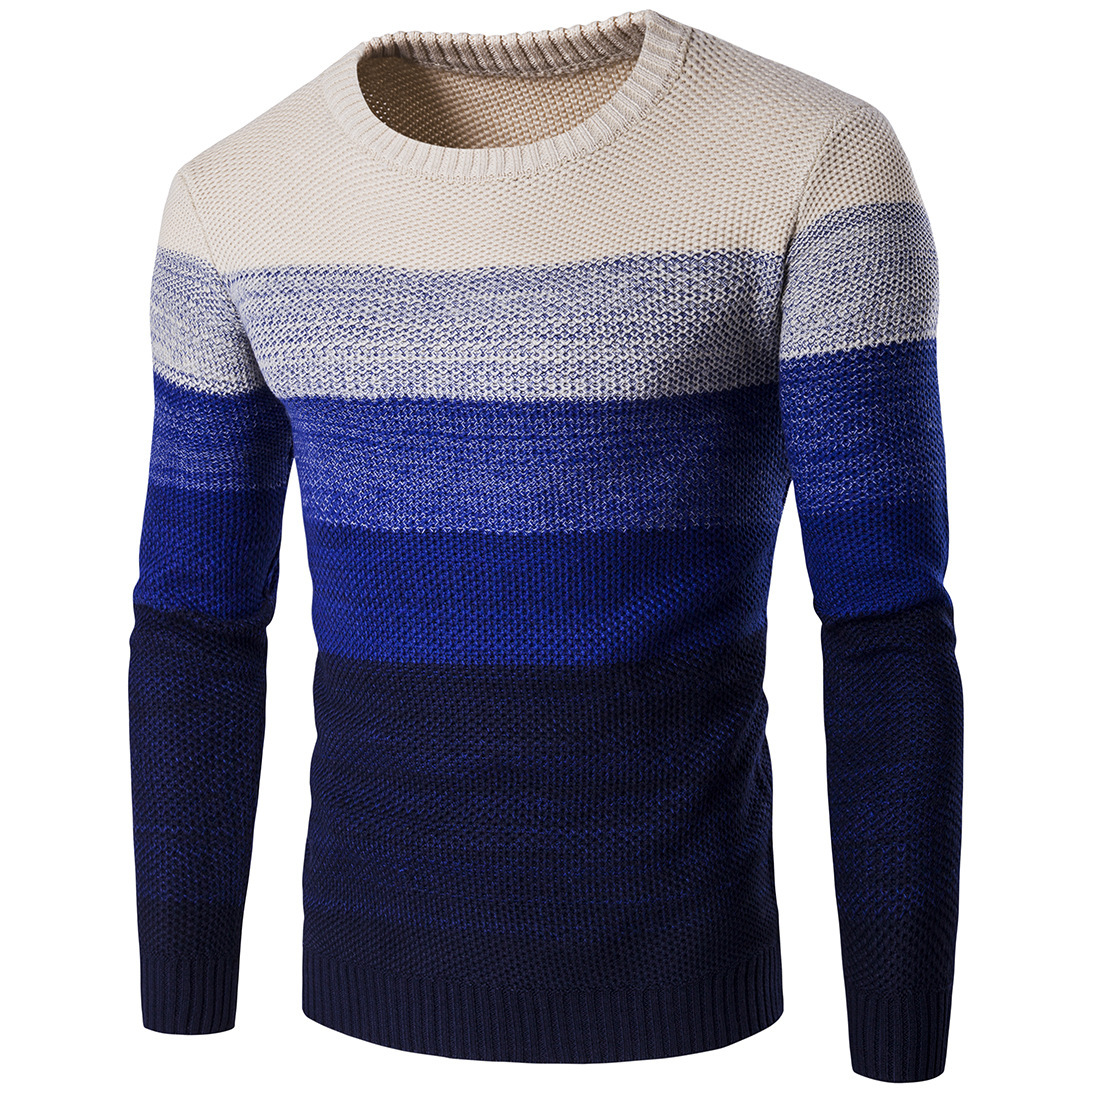 Men Knitted Sweater O Neck Striped Patchwork Casual Long Sleeve Slim Fit Pullover Tops blue